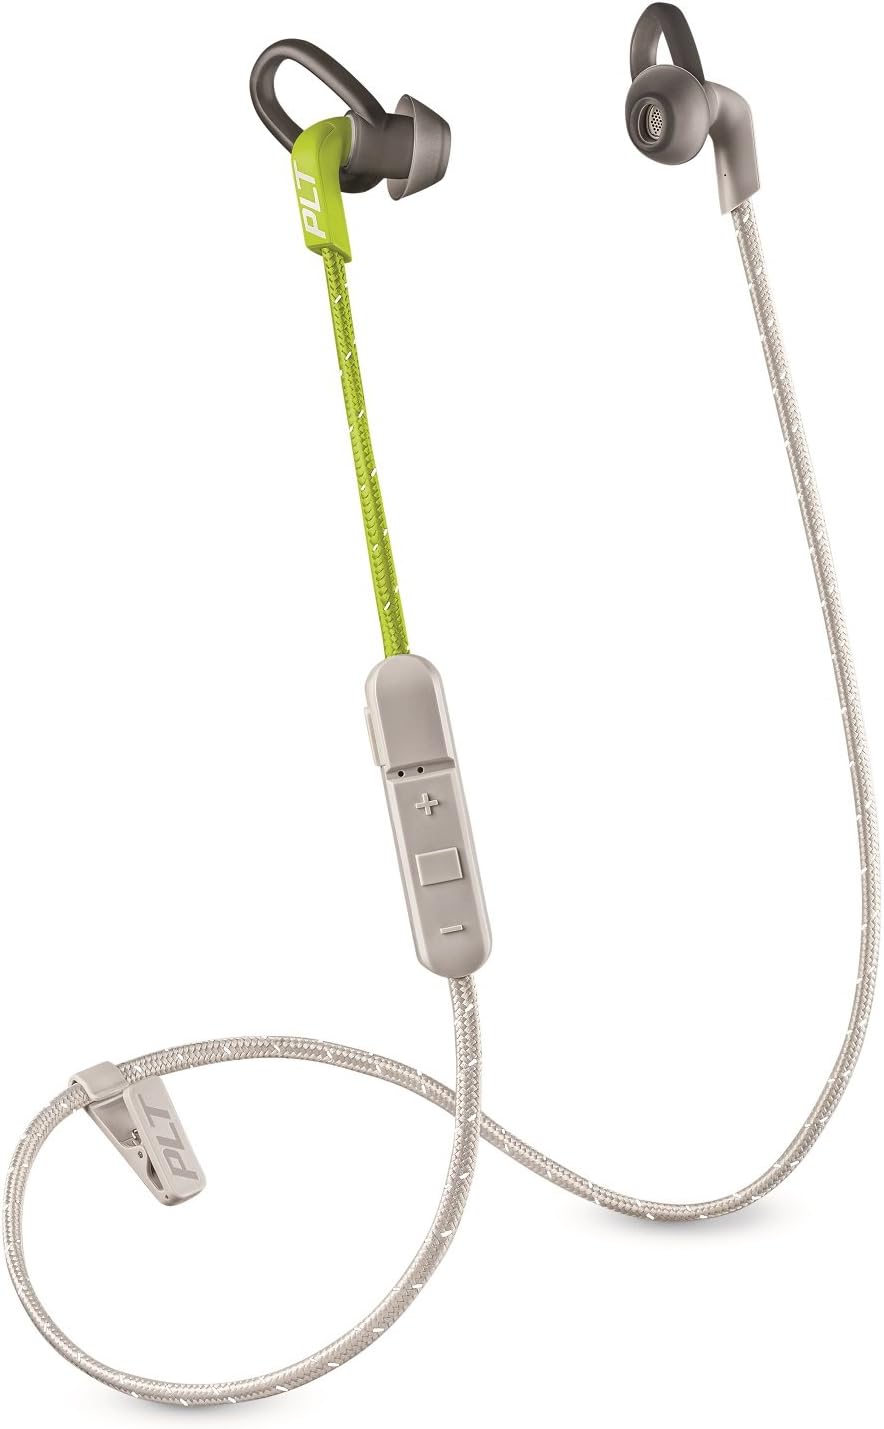 Grosbill Micro-casque Plantronics BackBeat Fit 305 gris, citron Intra Auriculaire